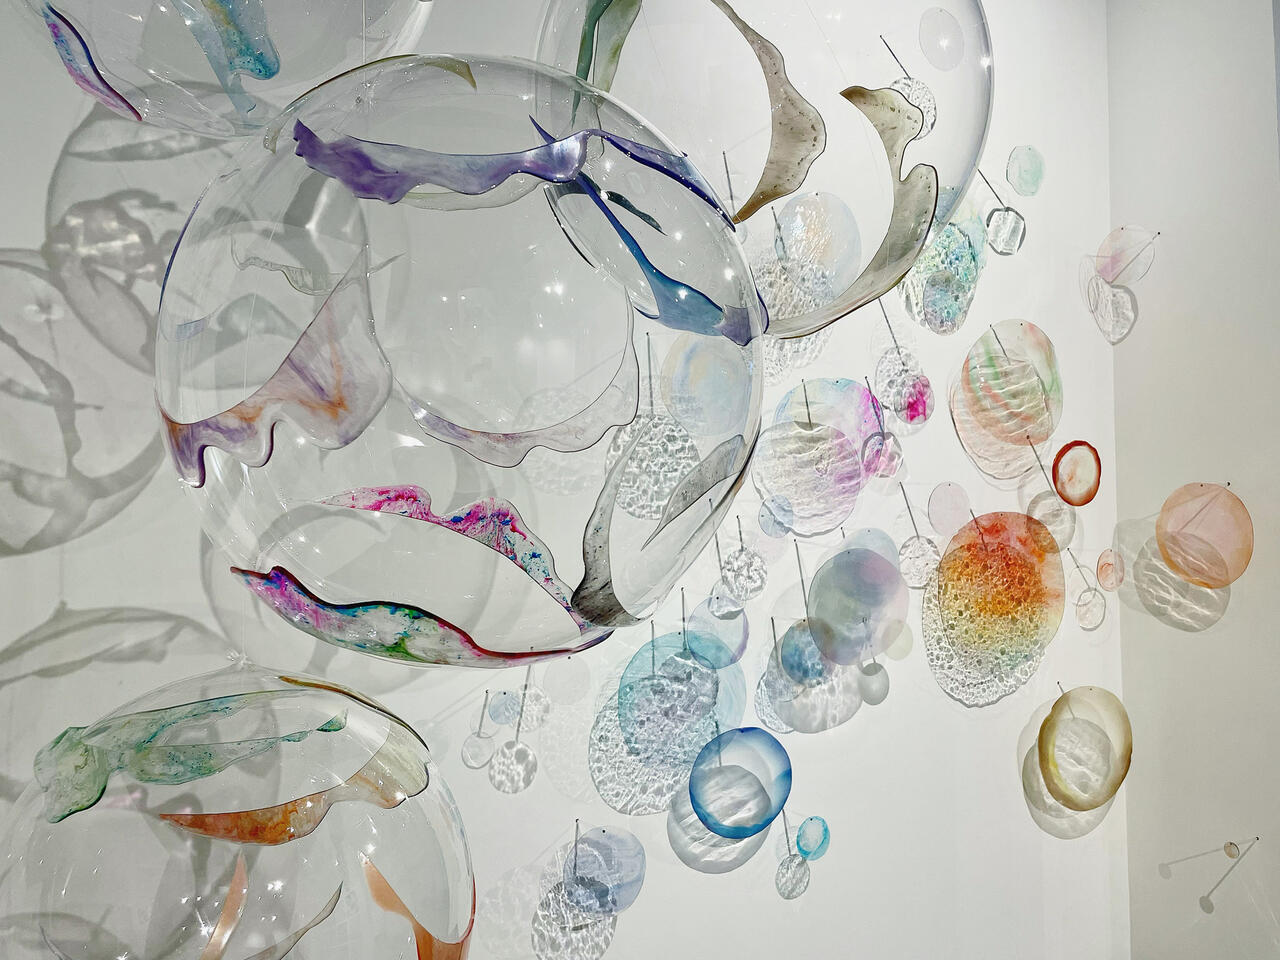 Image of a colorful glass installation